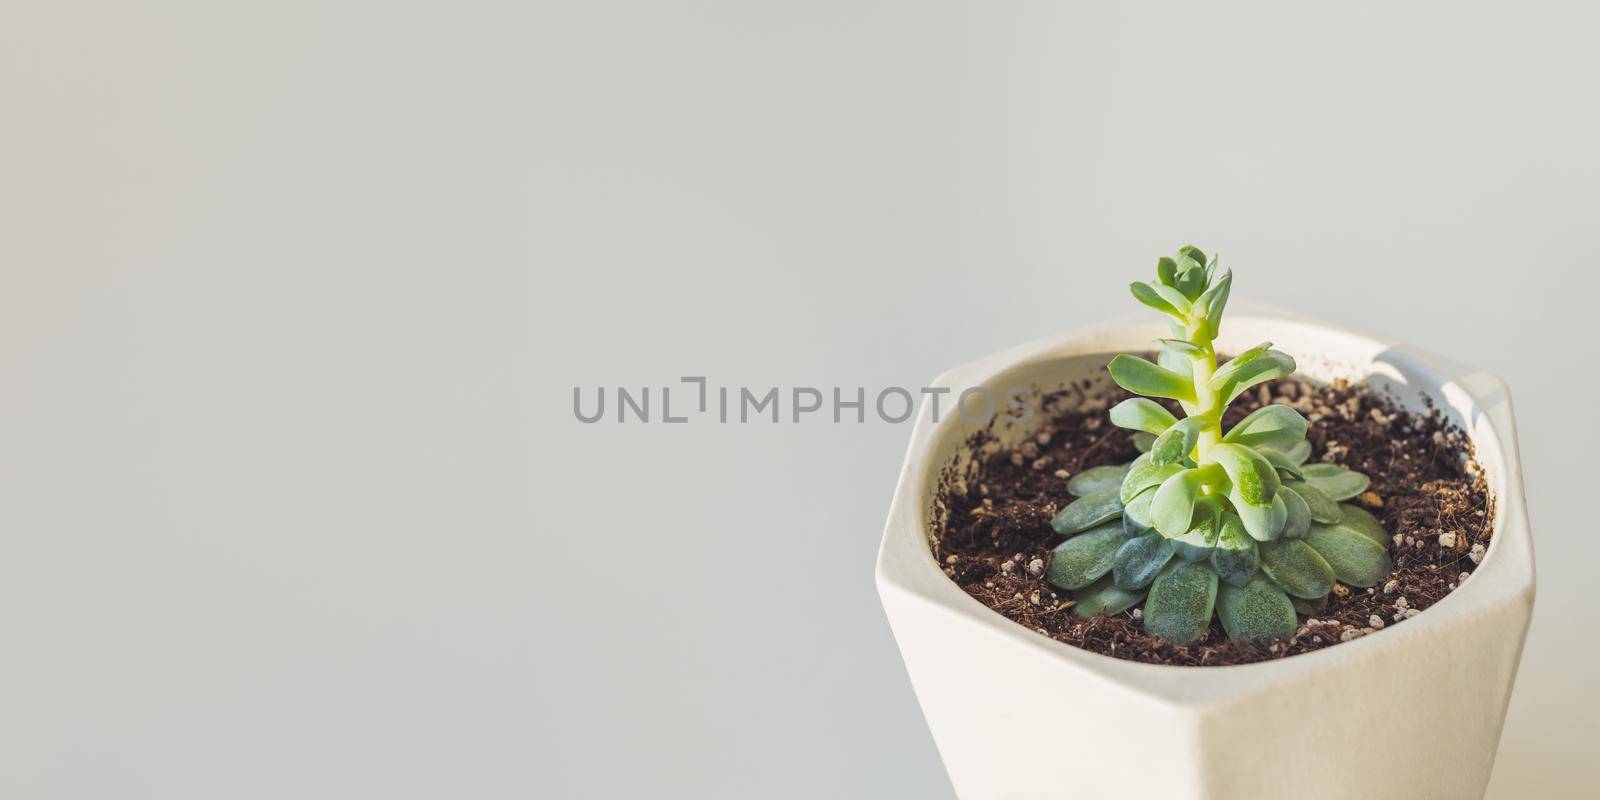 Flower pot with Echeveria. Green leaves of succulent plant on grey background. Peaceful botanical hobby. Gardening at home. Banner with copy space.